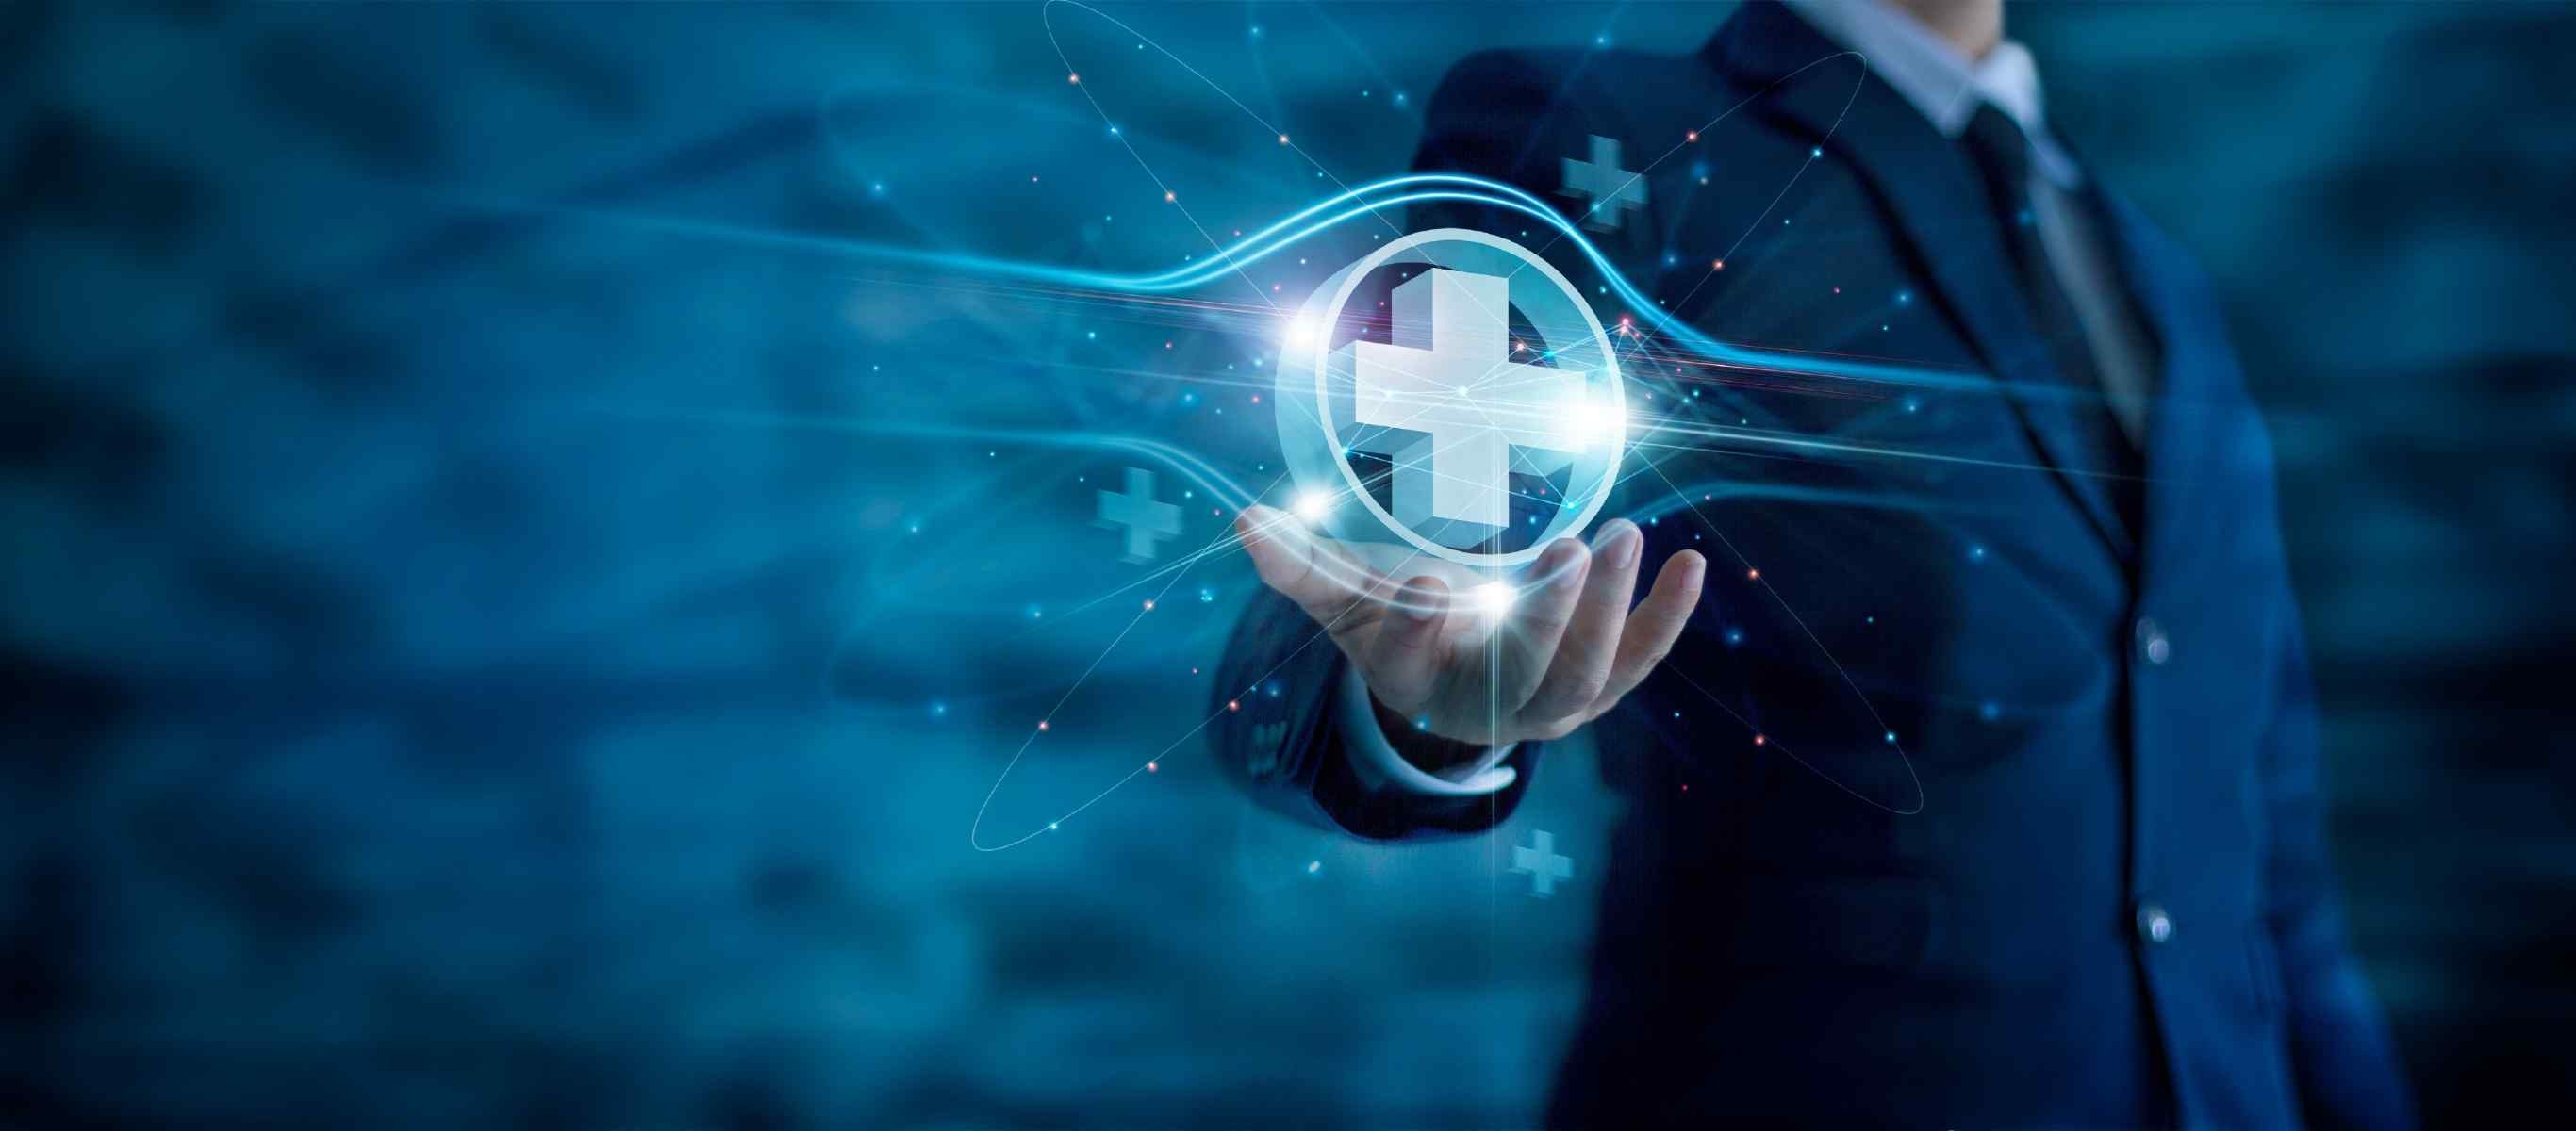 Healthcare C-Suite Must Evolve for Technological Shift